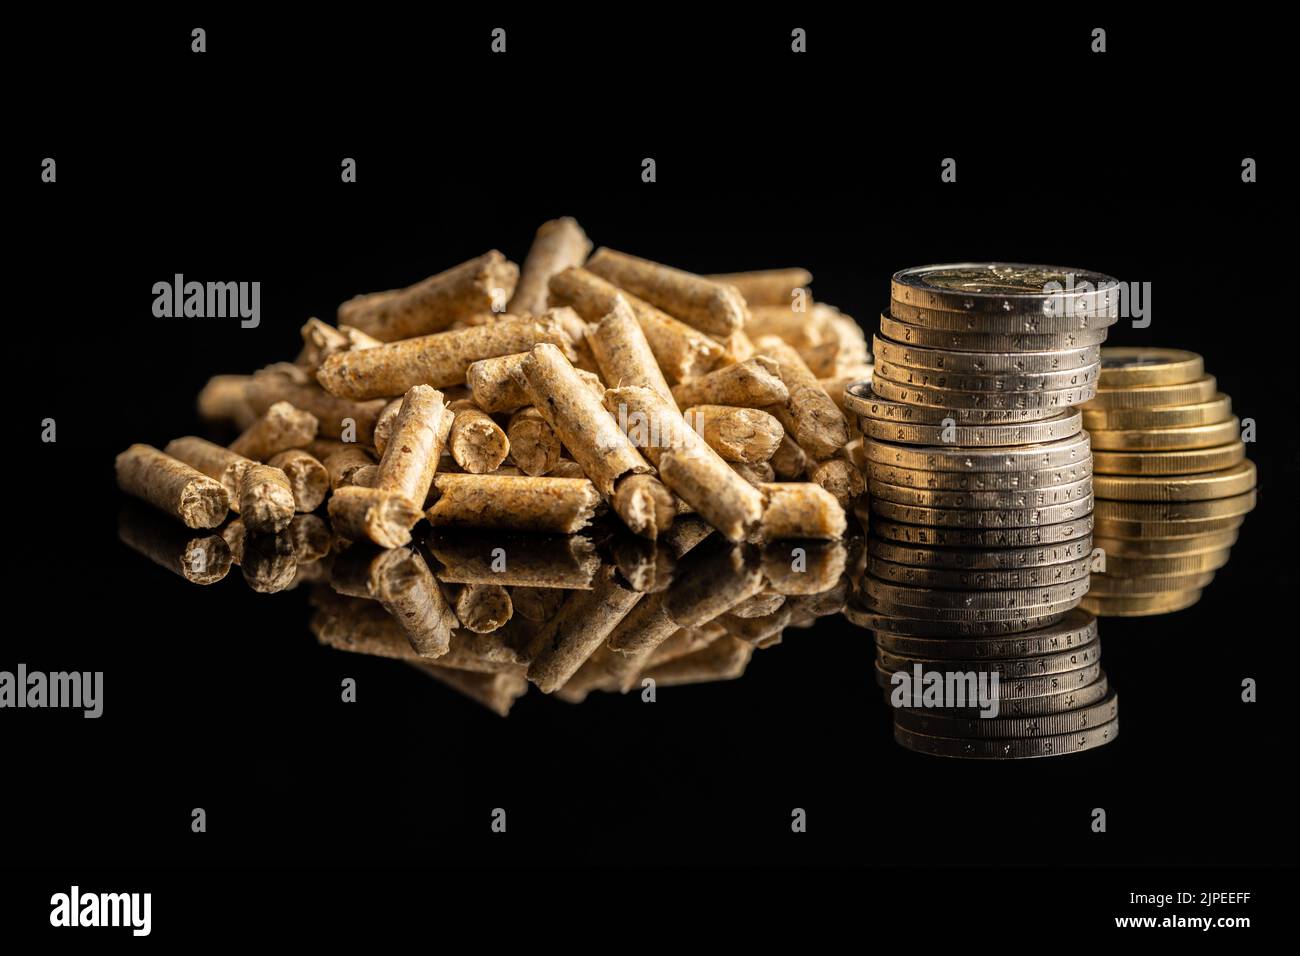 Wooden pellets and euro coins on black background. Biomass - Renewable source of heating. Stock Photo